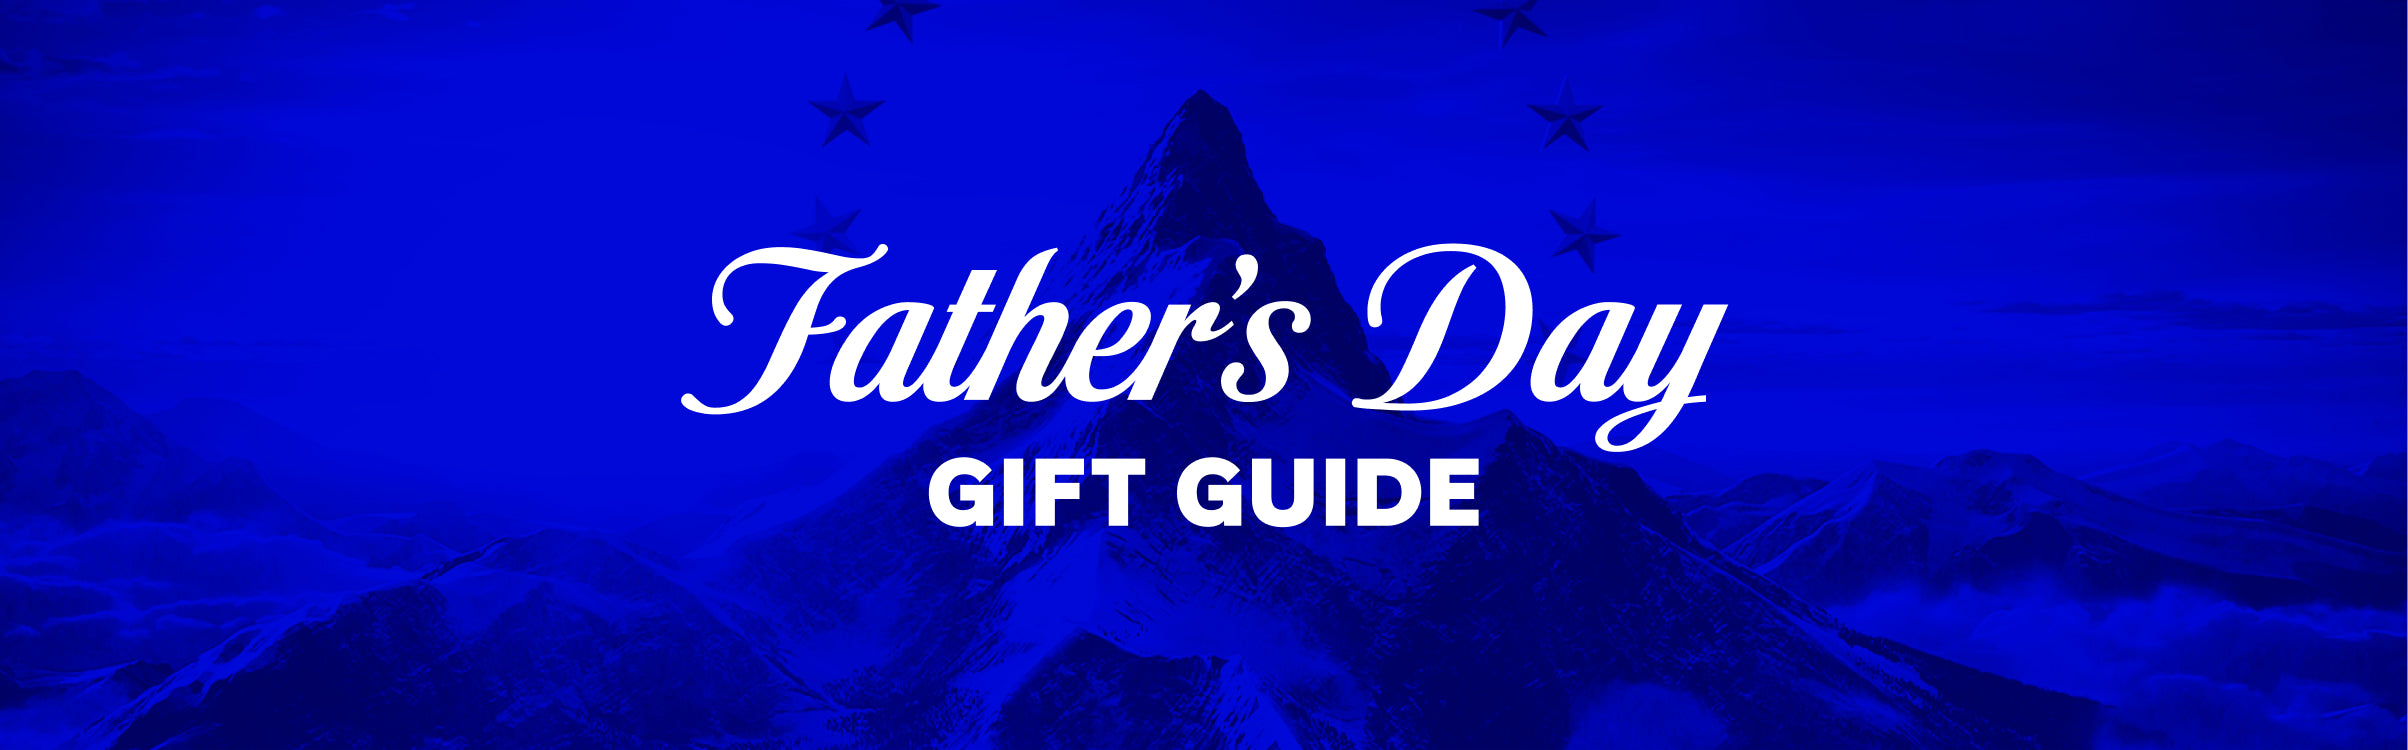 premium-banner-father's day gift guide